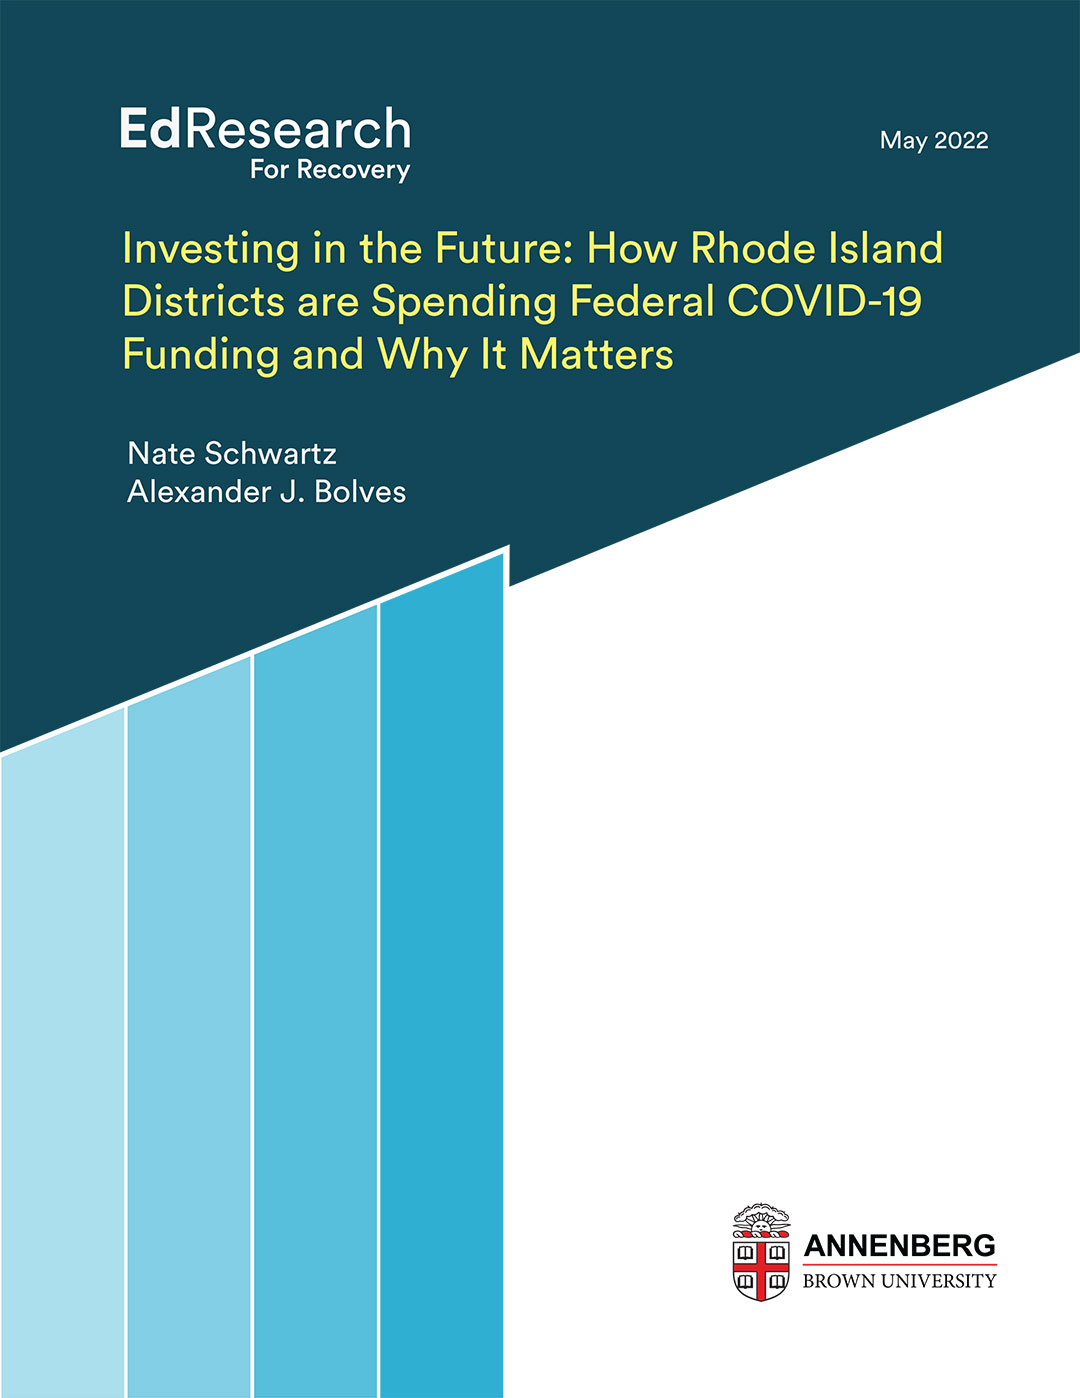 Investing in the Future:  How Rhode Island Districts are Spending Federal COVID-19 Funding and Why It Matters